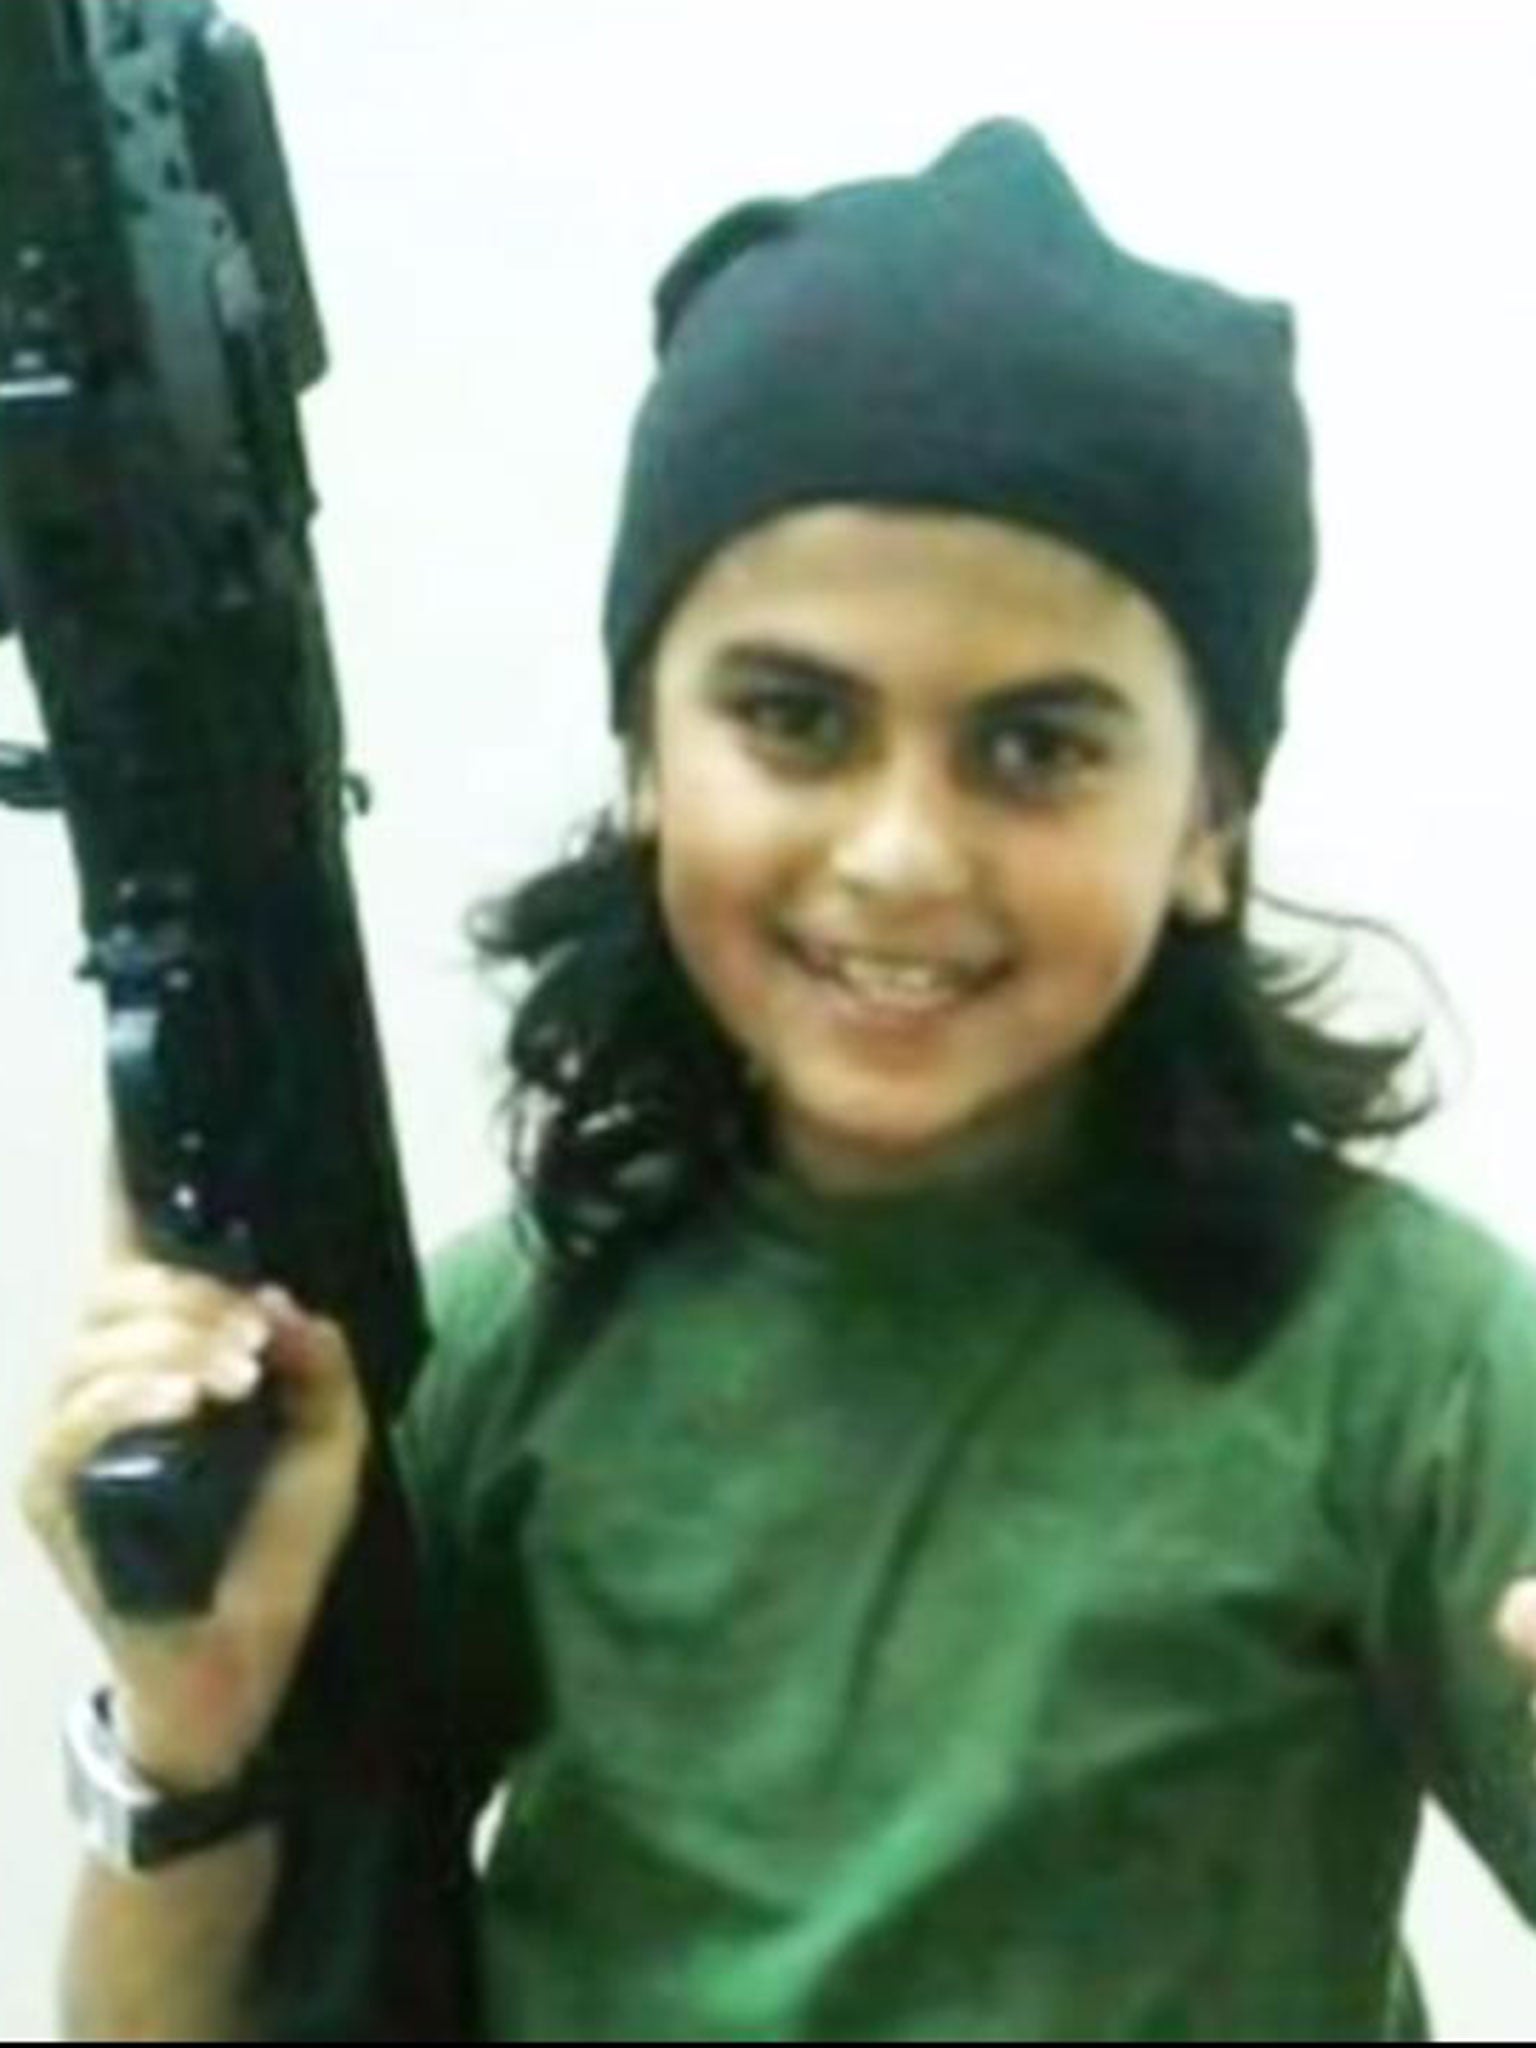 Isis supporters are circulating images of a child who they say has become the youngest to be killed in battle while fighting for the extremist group